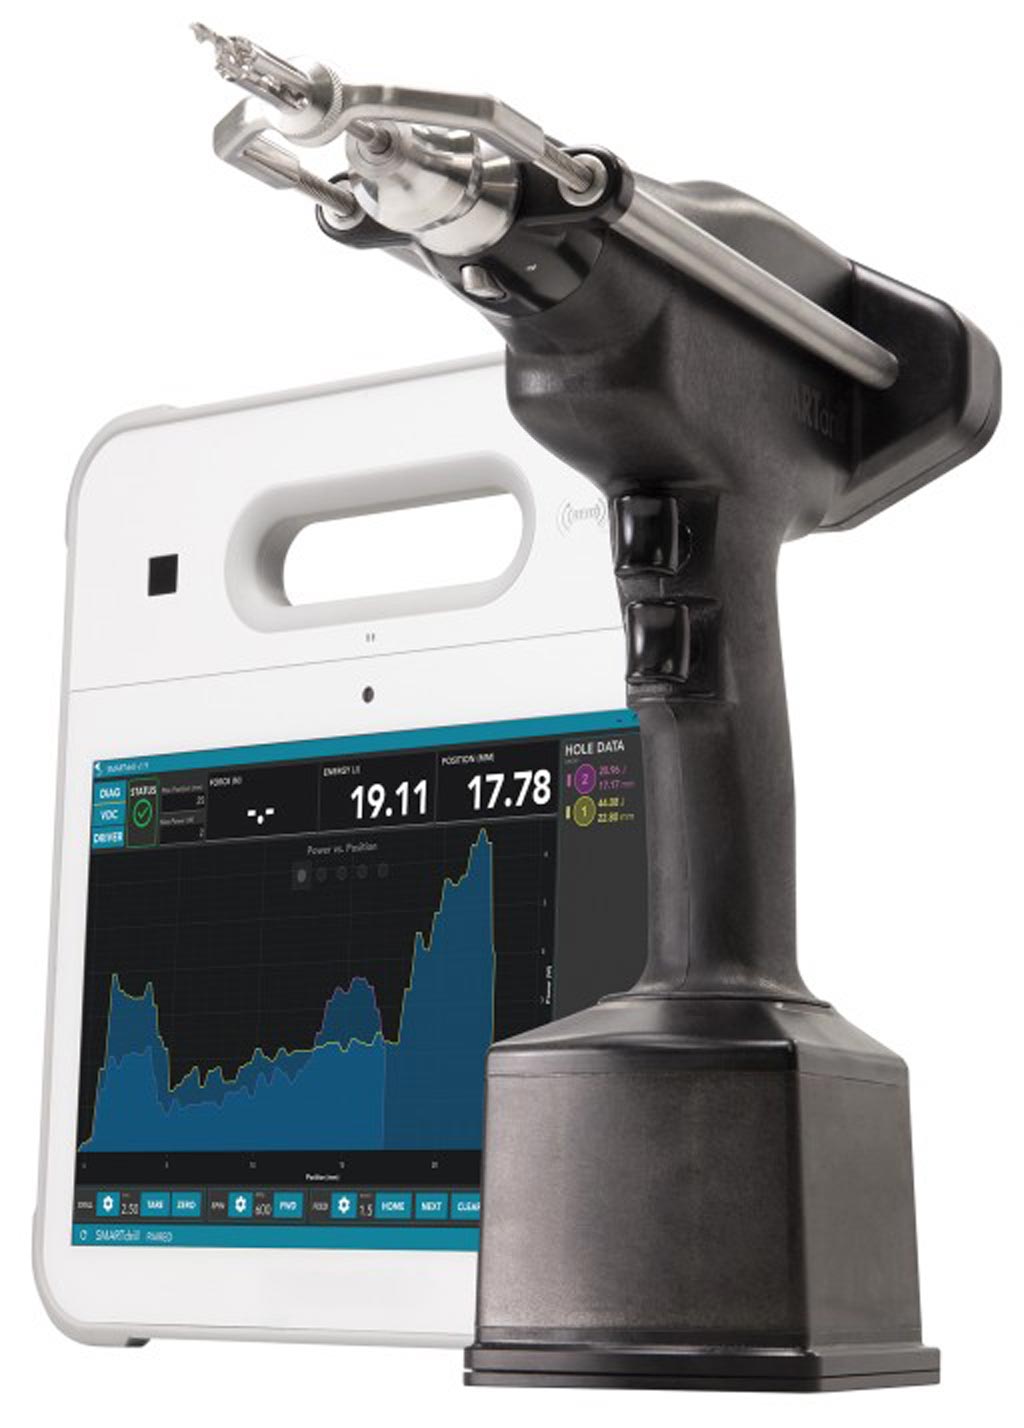 Image: The SMARTdrill 6.0 and its GUI (Photo courtesy of Smart Medical Devices).